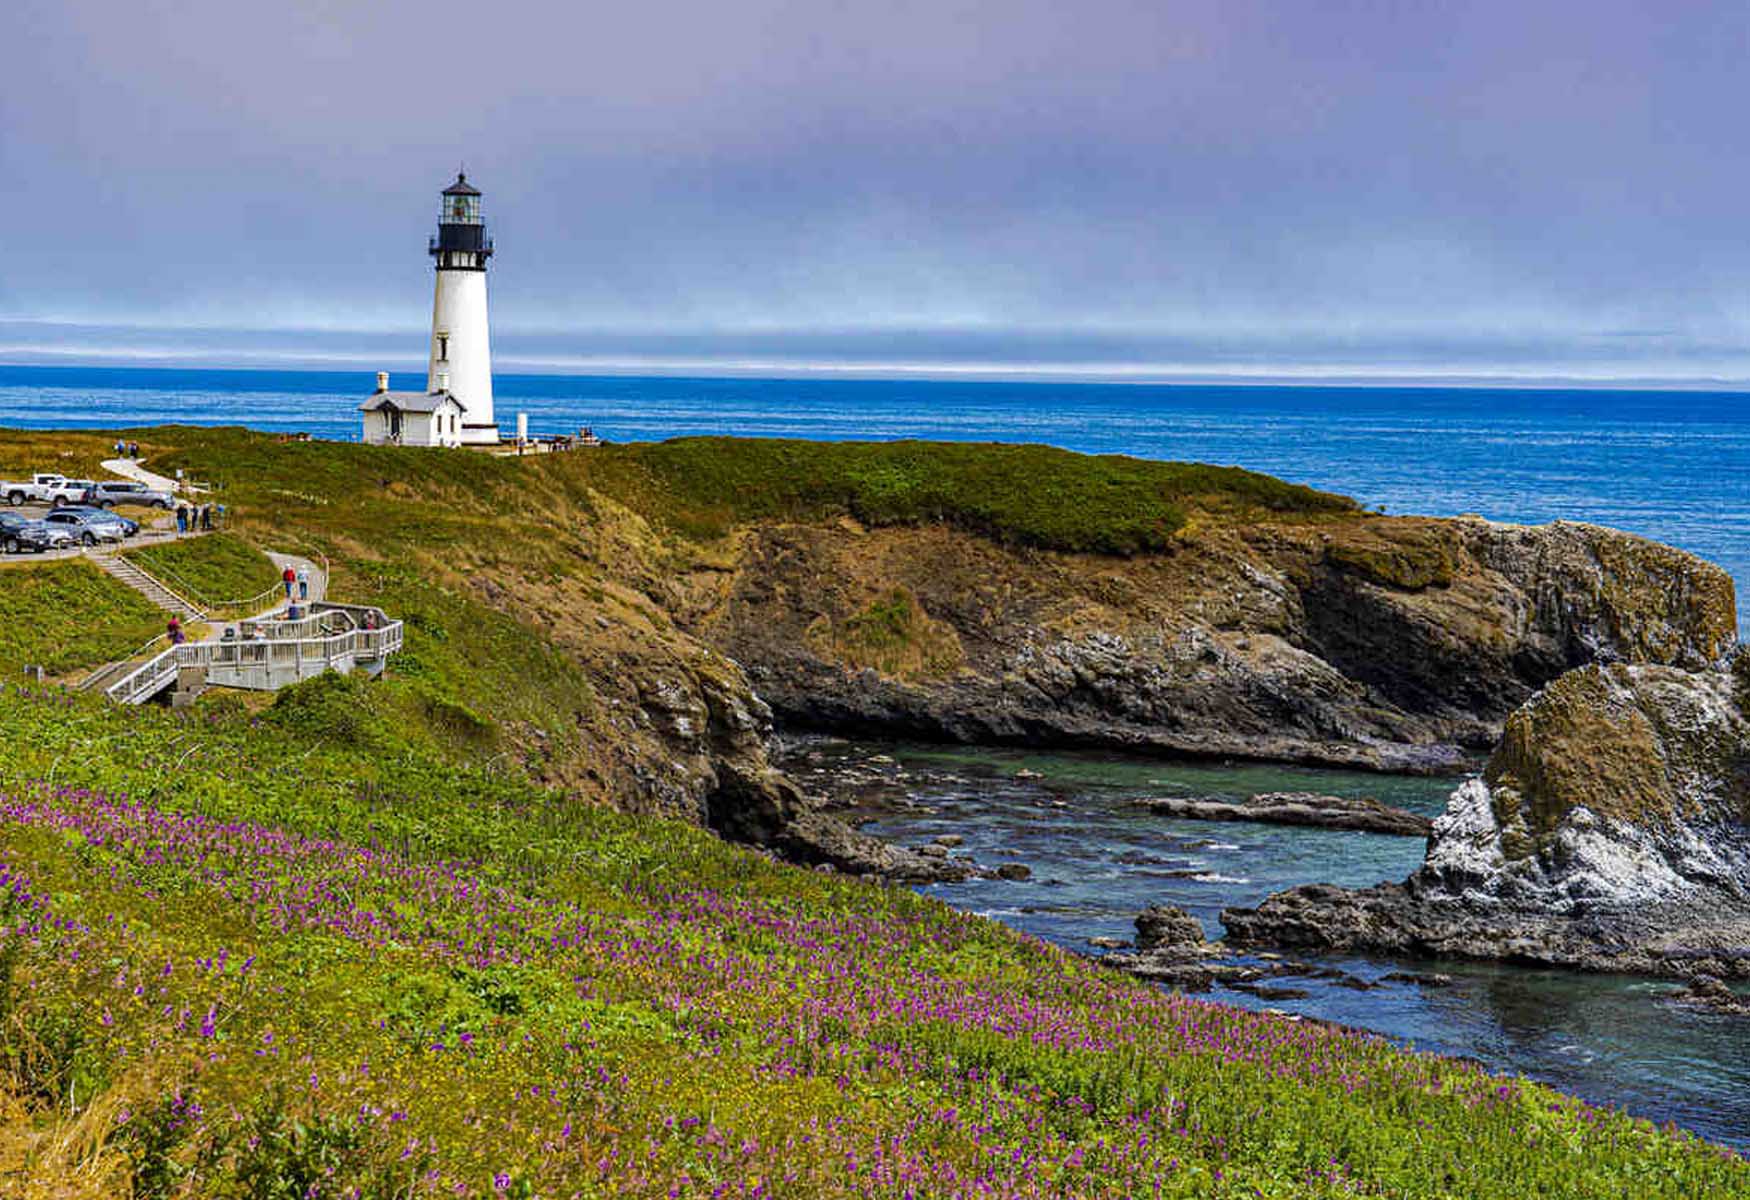 Where To Stay In Oregon Coast: The BEST Areas